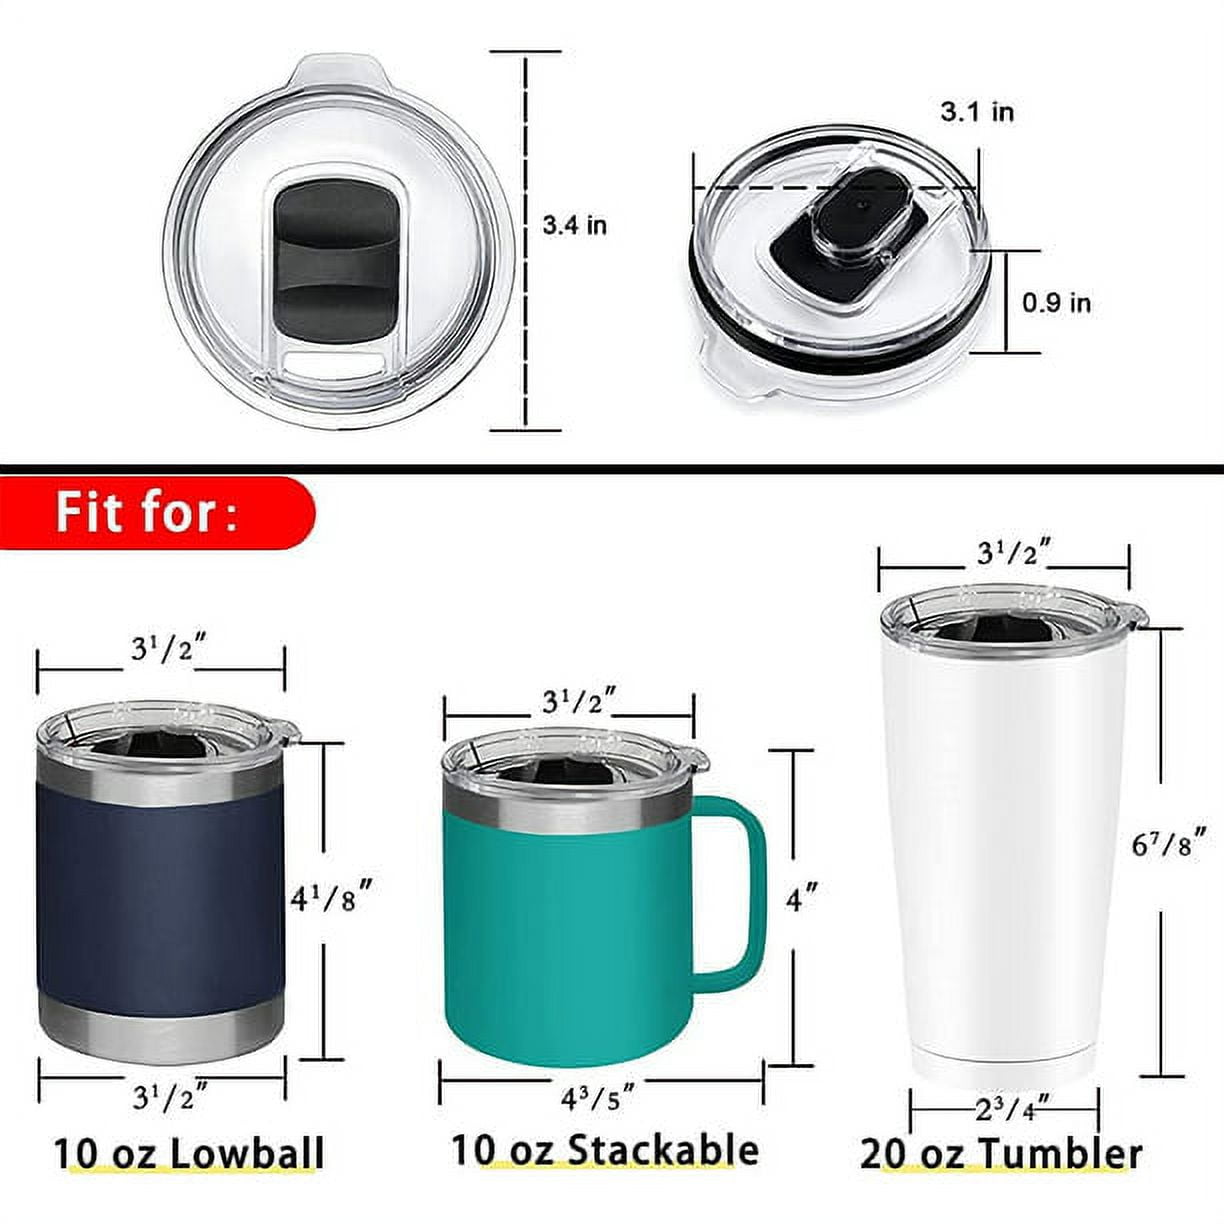 KISSWILL 20oz Tumbler Lids Replacement Lid with 4 Pcs Magnetic Slider  Compatible with YETI Rambler, Ozark Trail, Old Style Rtic and More -  Magnetic